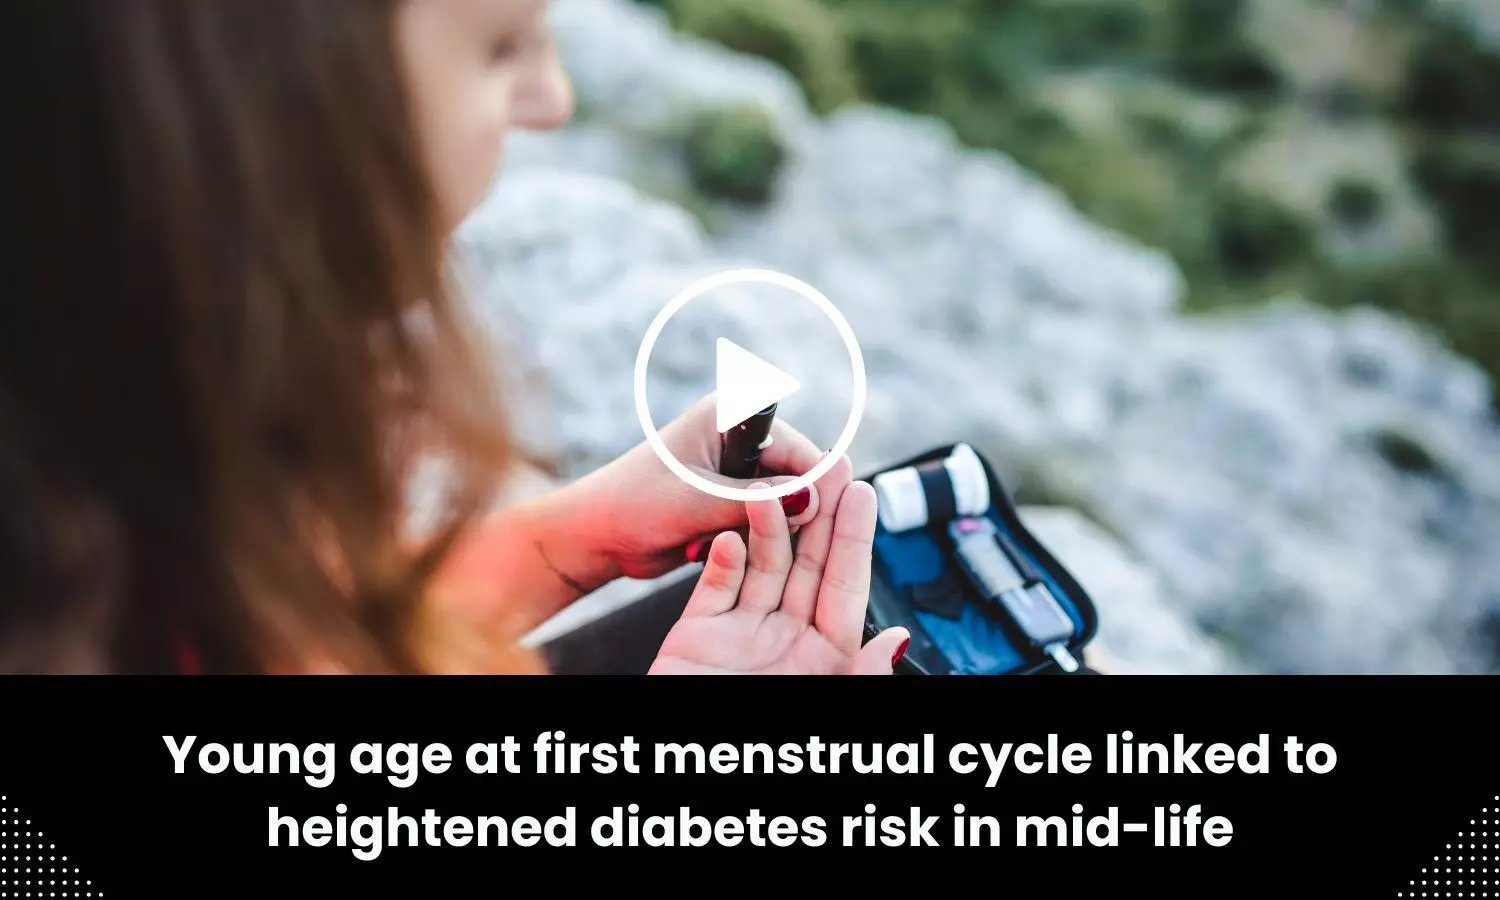 Young age at first menstrual cycle linked to heightened diabetes risk in mid life